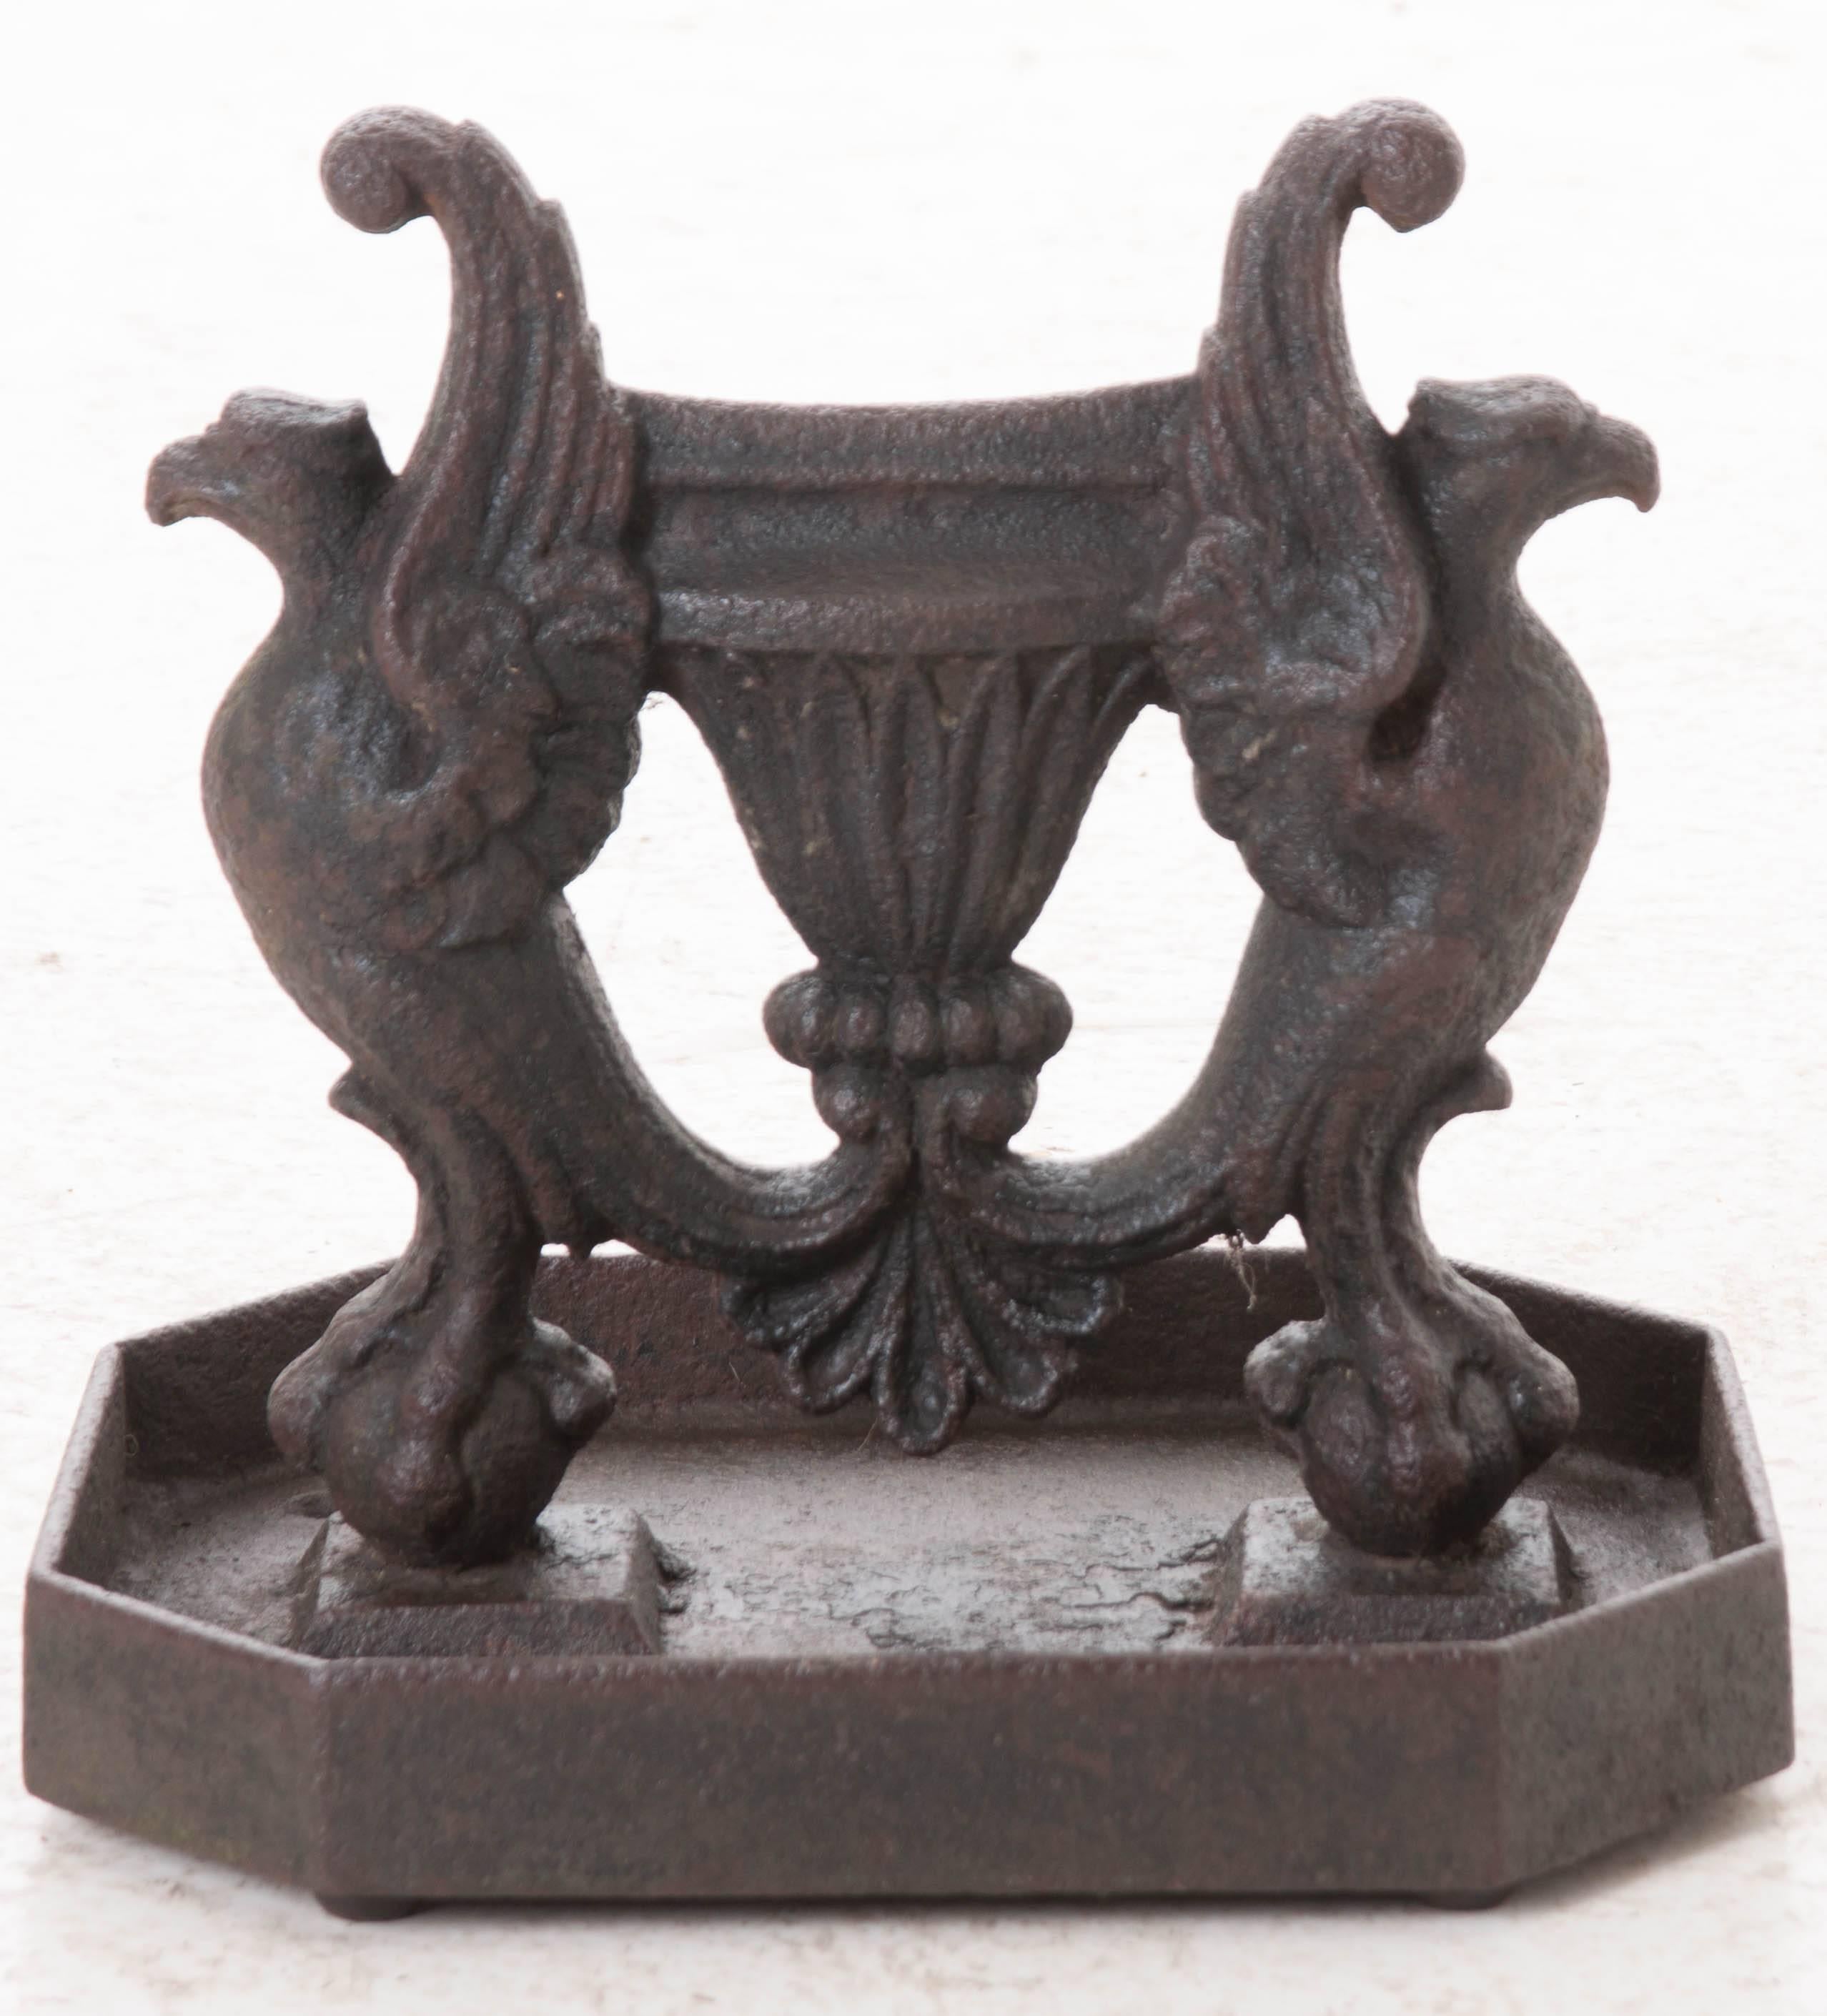 Boot scrapers, as their name suggests, were placed outside the entrance of a building and used to remove mud and debris from a person's boots prior to entry. This piece is made of solid cast iron, is adorned with two regal phoenixes and has very